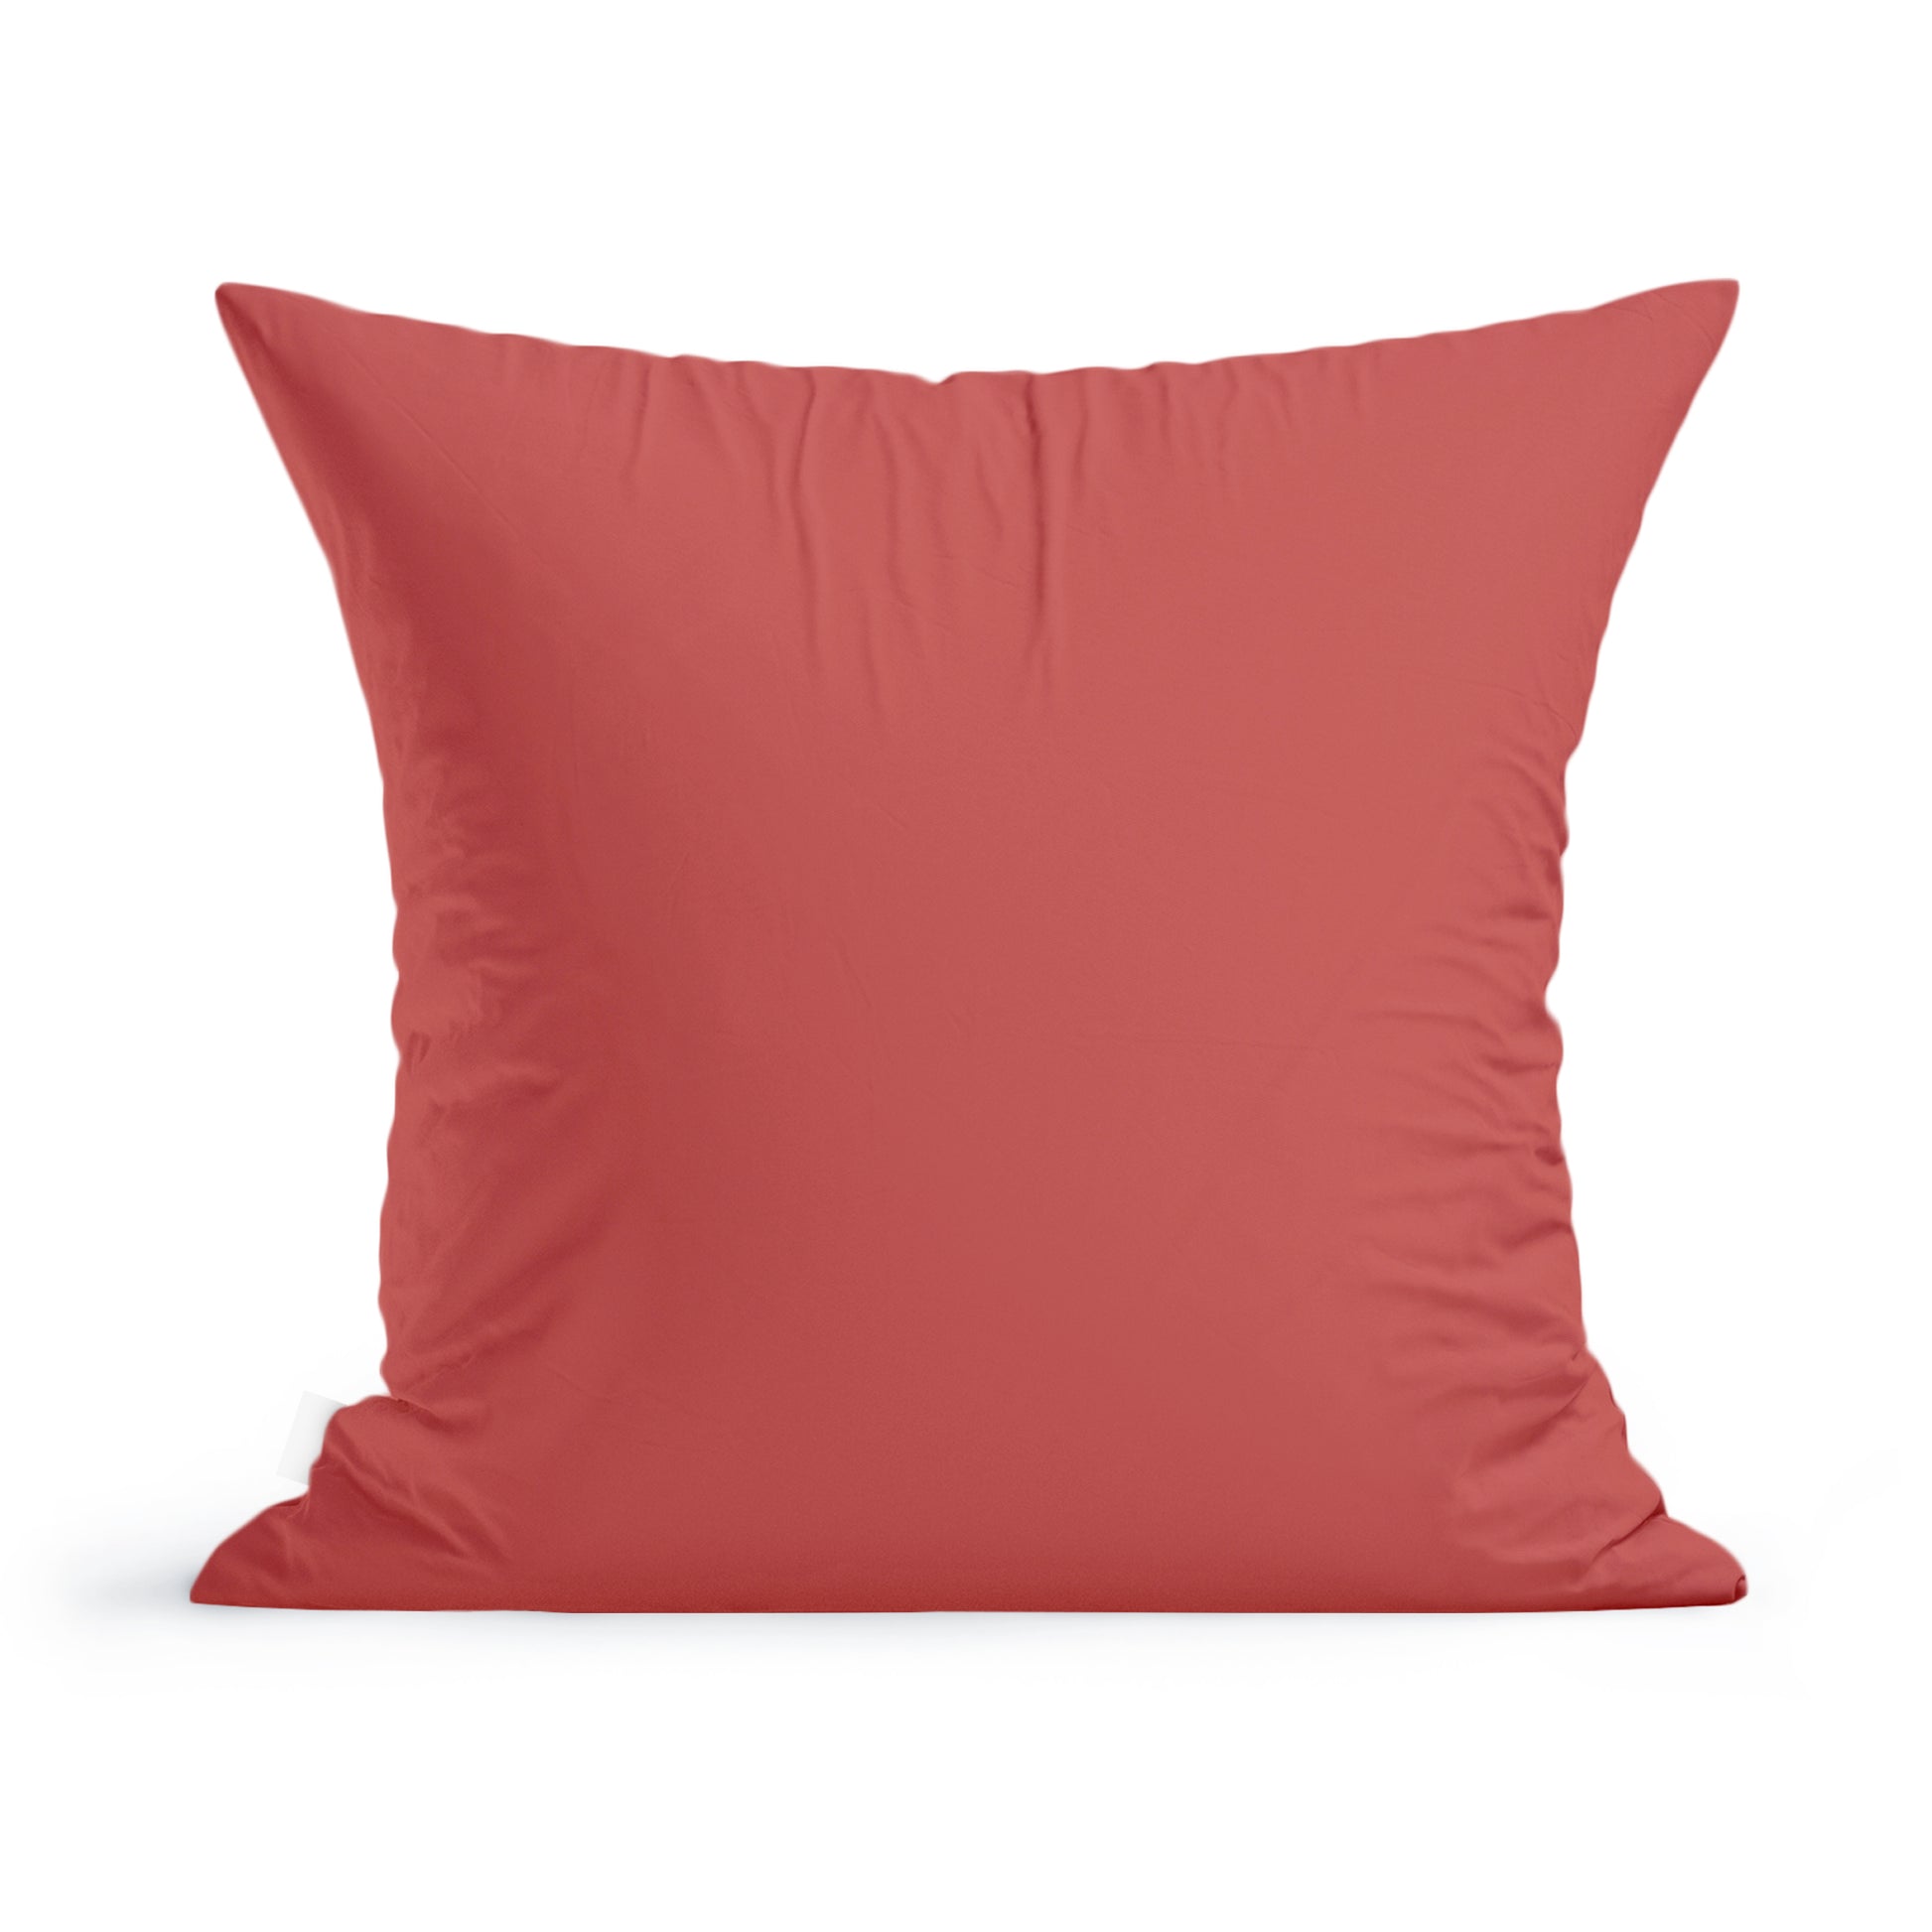 A plain coral-colored State of Maine Pillow cover by Rustic County isolated on a white background.